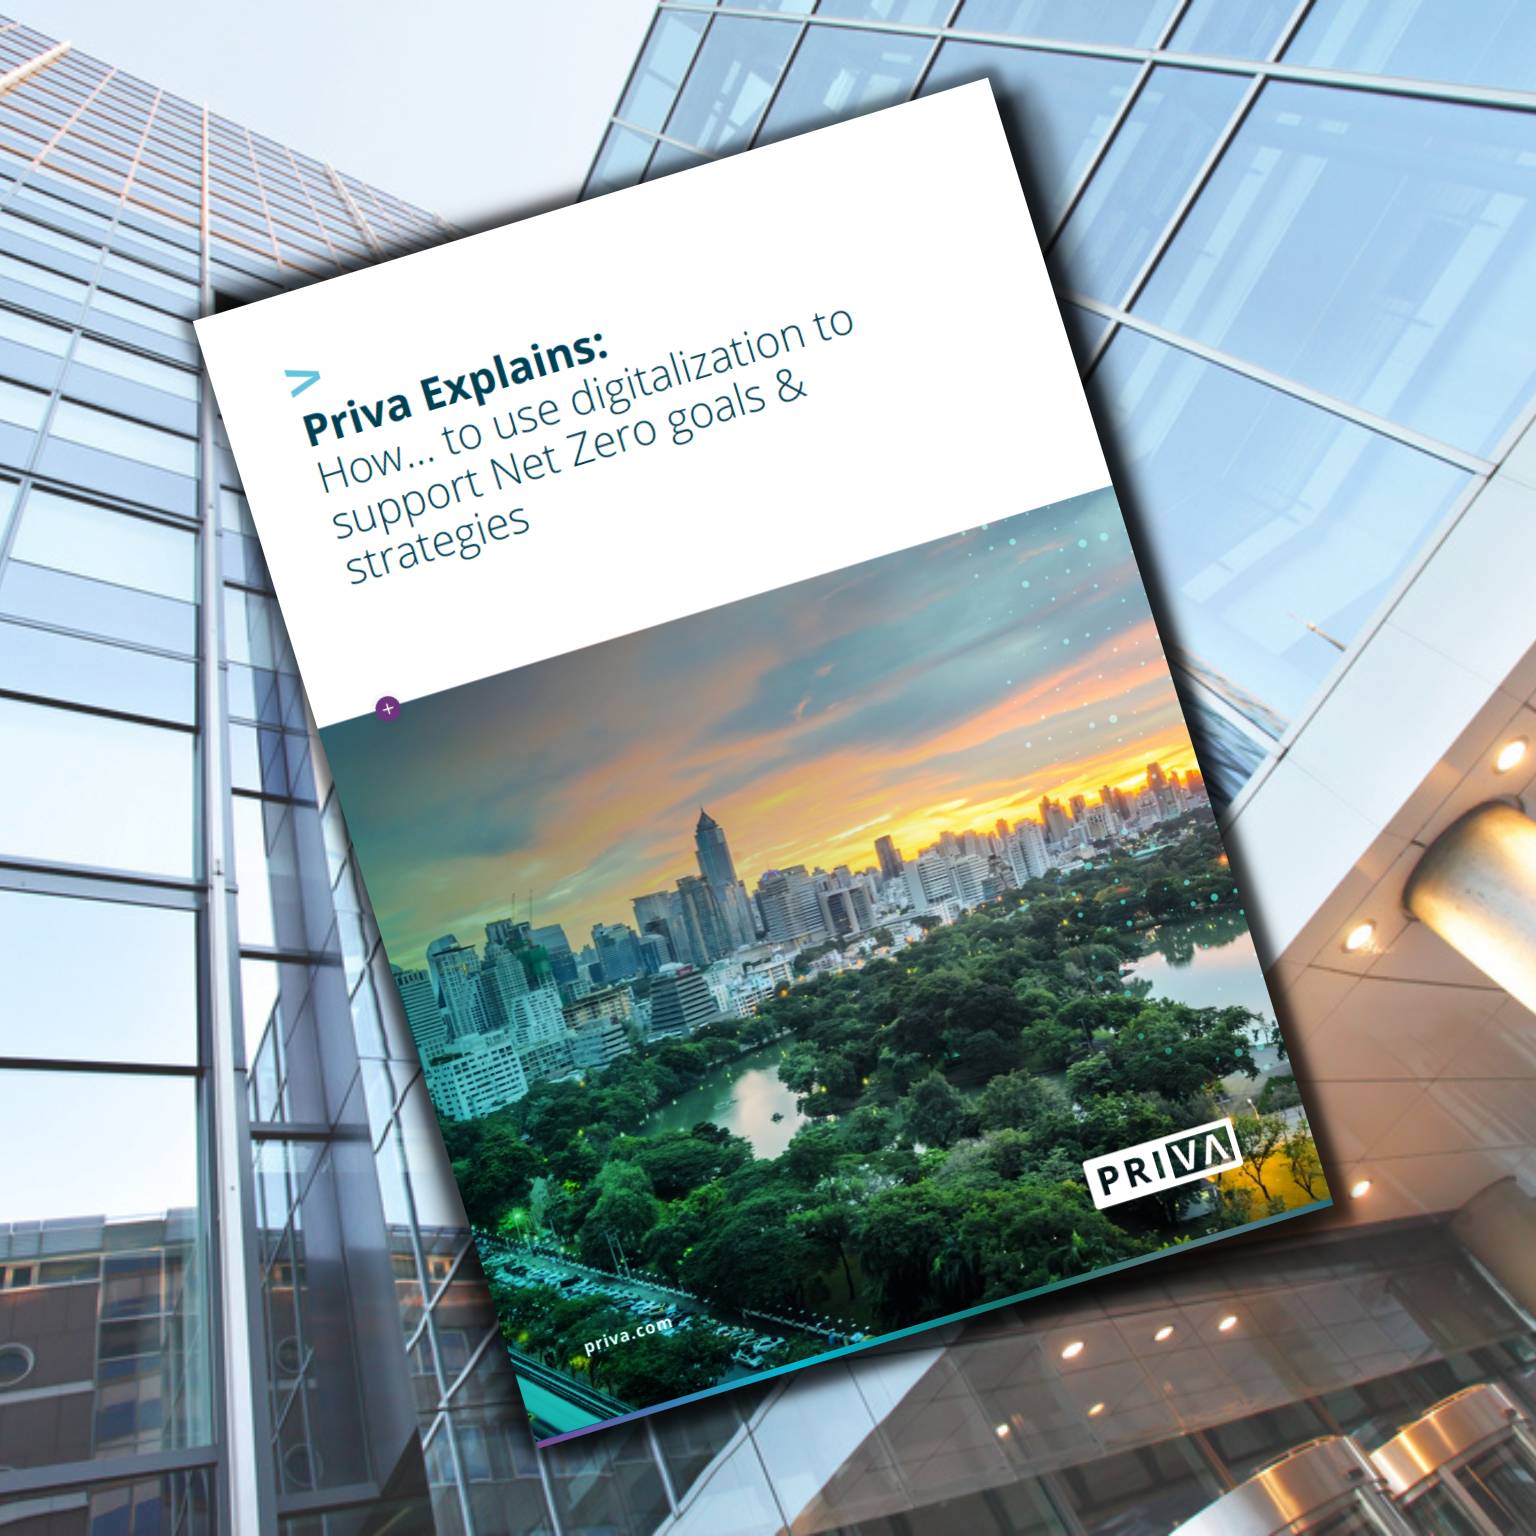 Priva's White Paper: The role of digitalizing buildings in achieving Net Zero